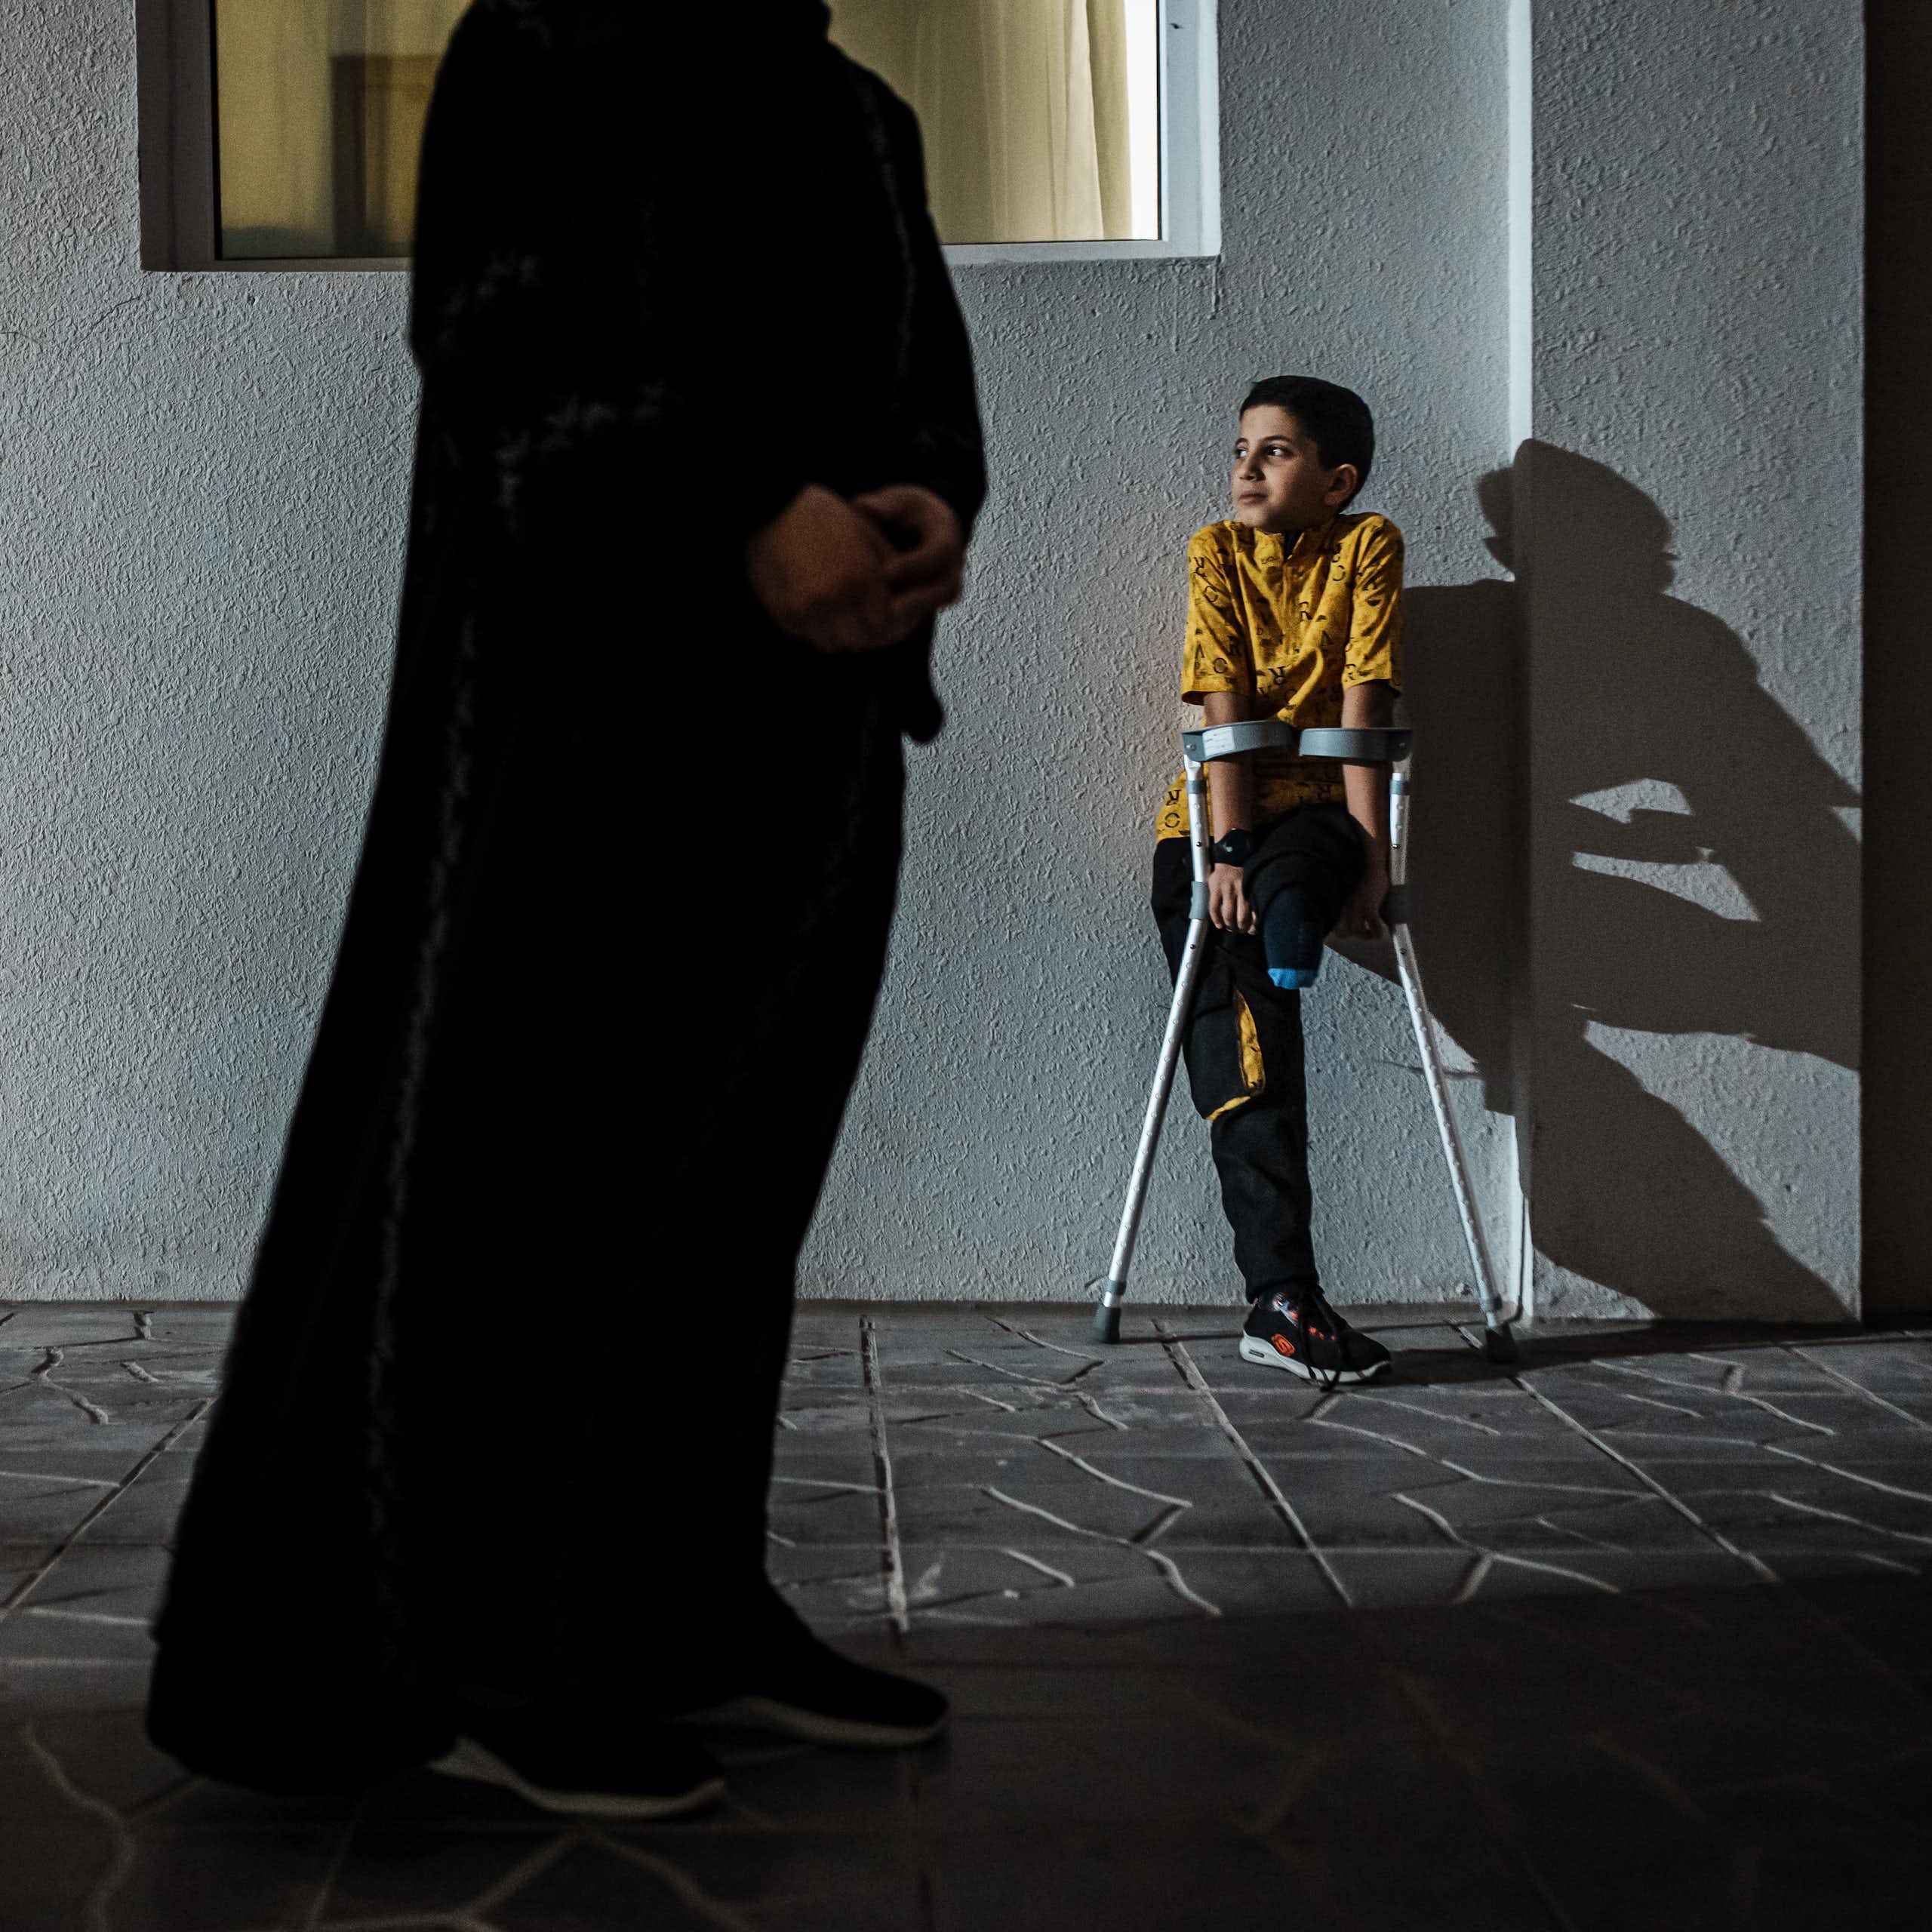 Young boy without a leg uses crutches as he leans against a wall. A faceless adult stands in the foreground.